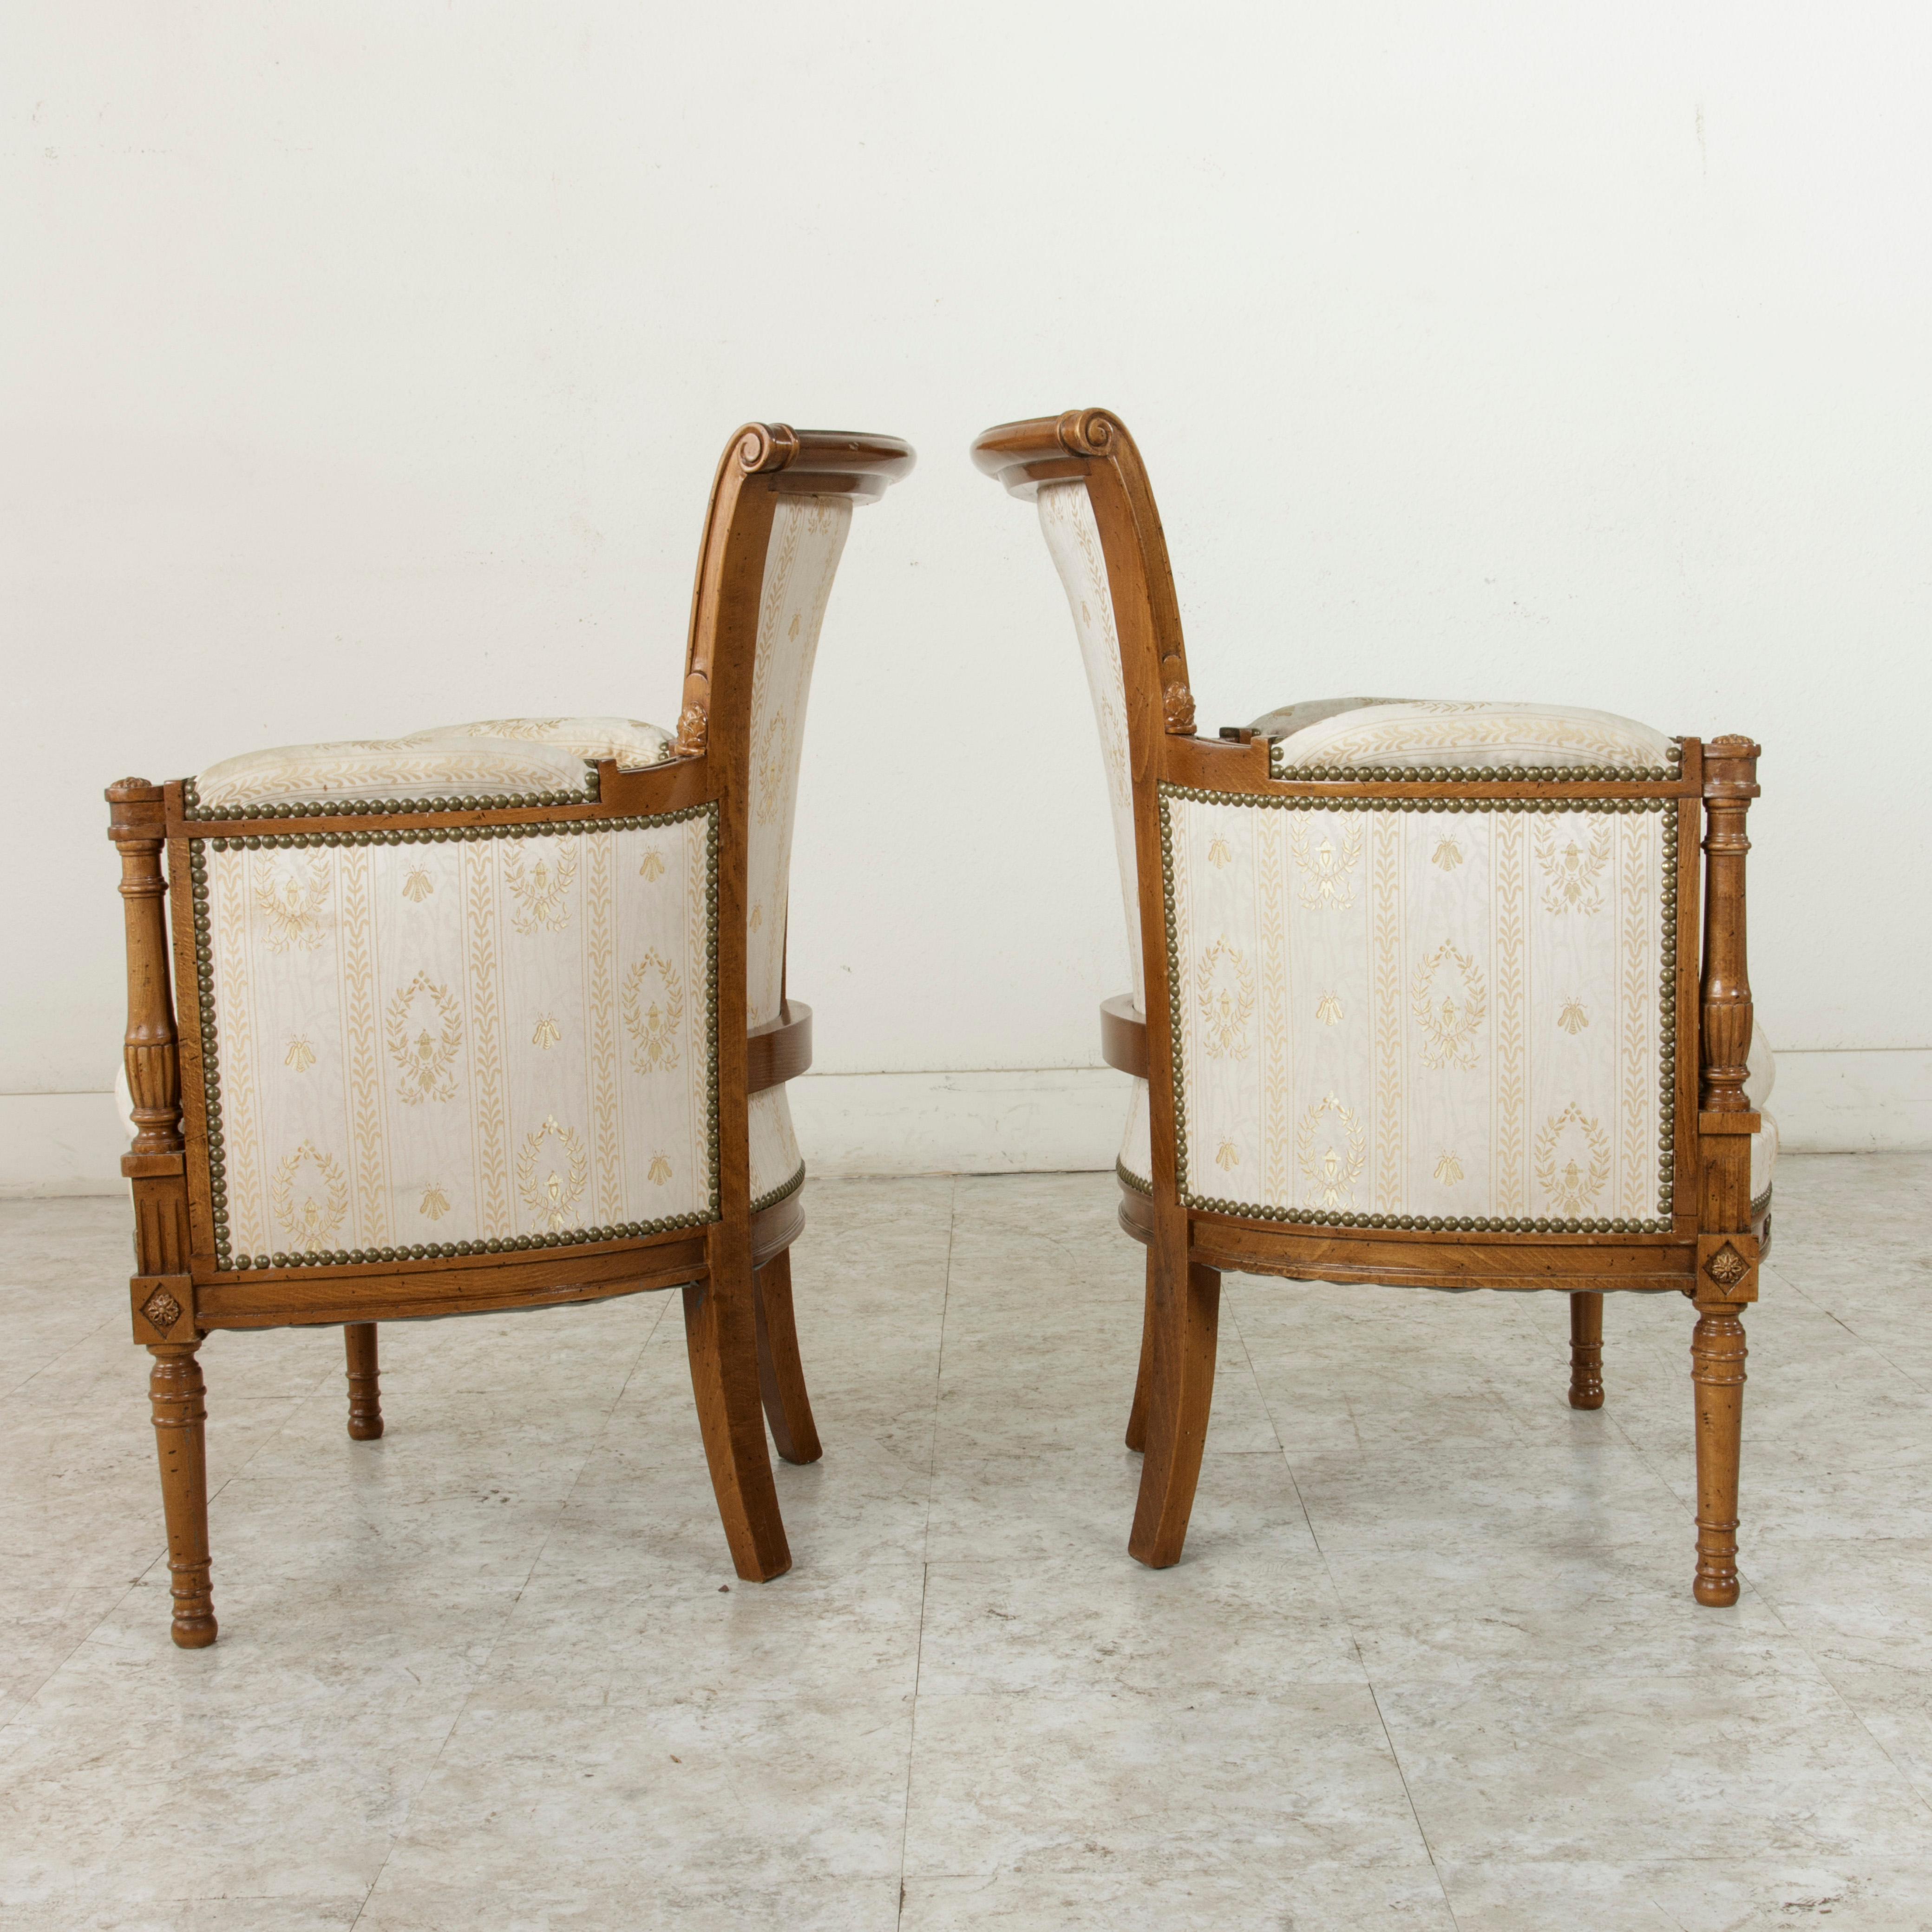 Early 20th Century Pair of French Directoire Style Walnut Bergères or Armchairs, circa 1900